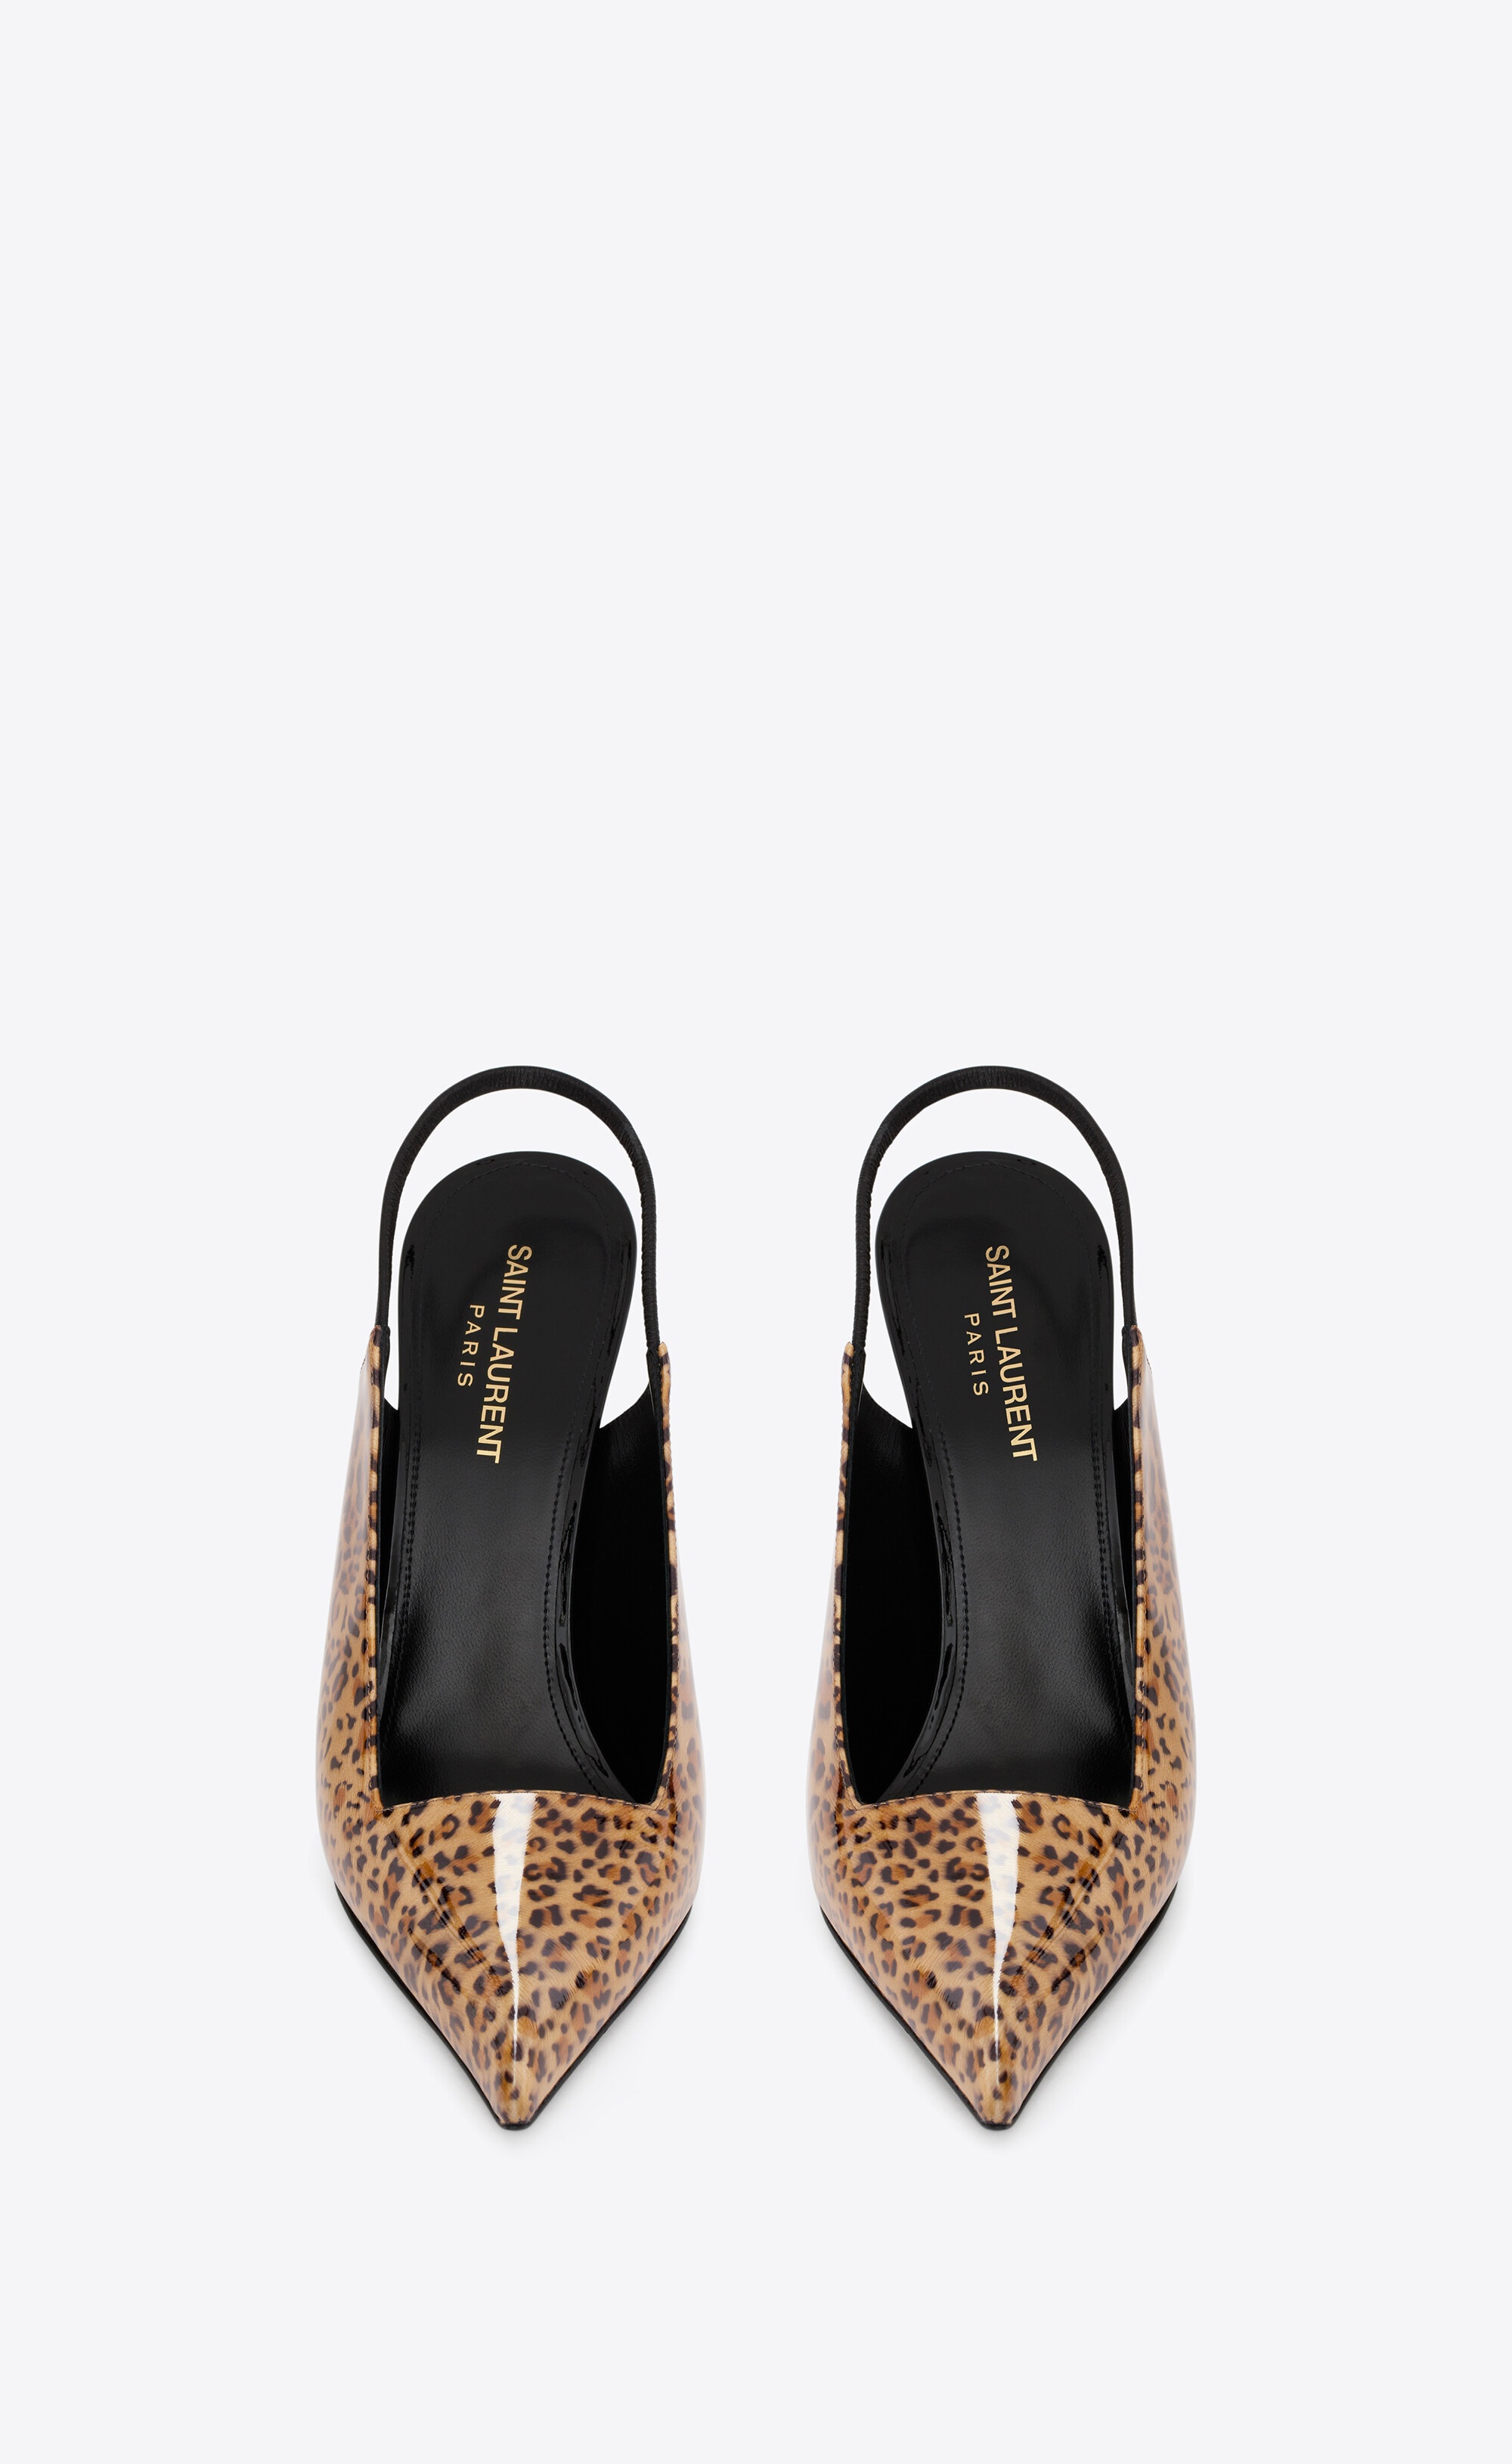 raven slingback pumps in leopard-print patent leather - 2